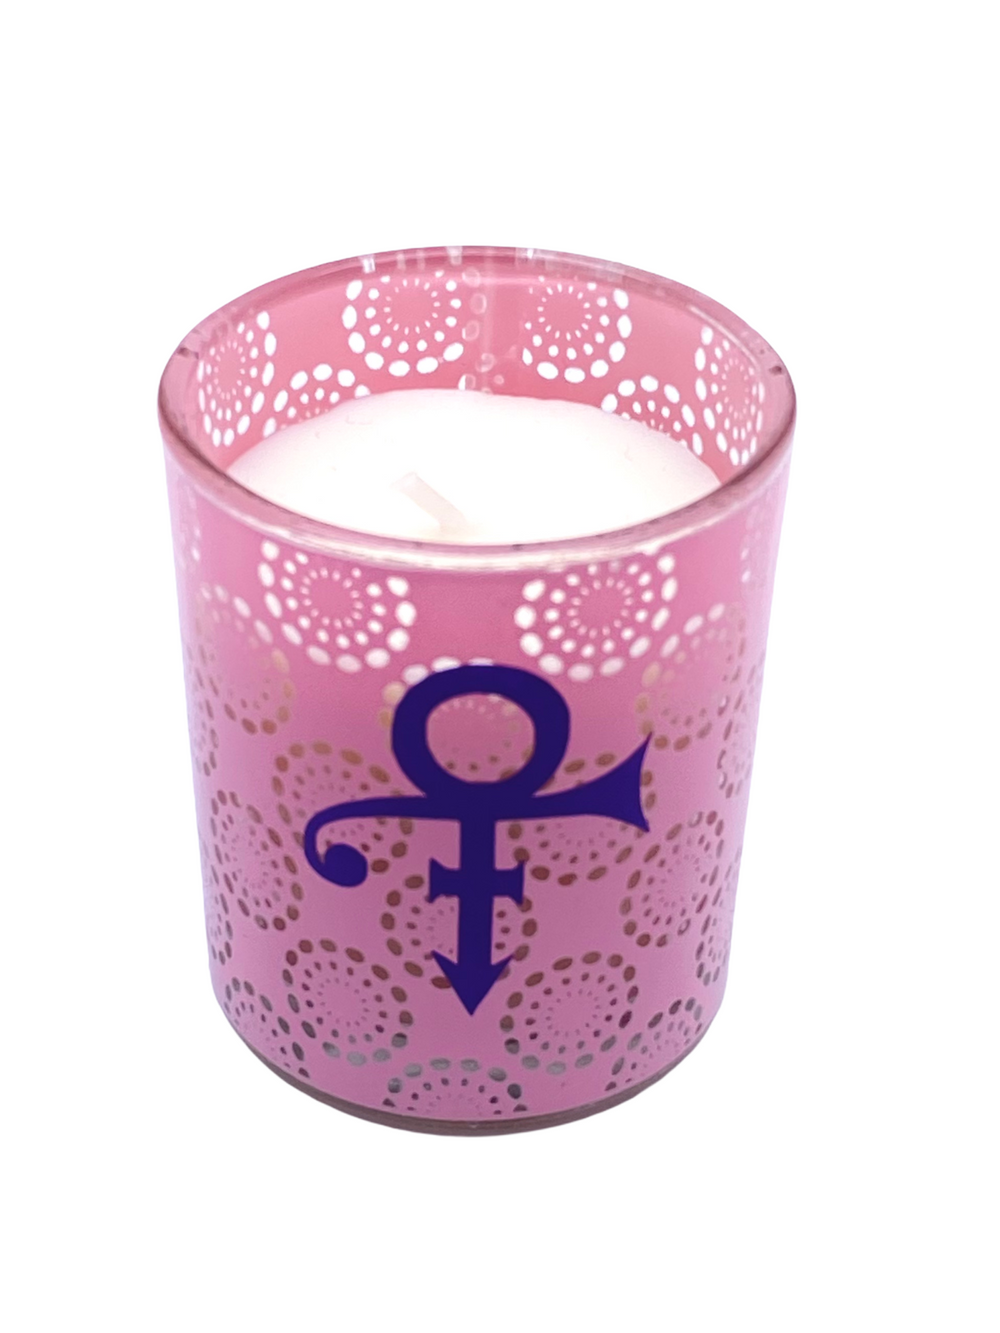 Prince – NPG Store Official Merchandise Small Candle In Holder Pink Love Symbol Prince